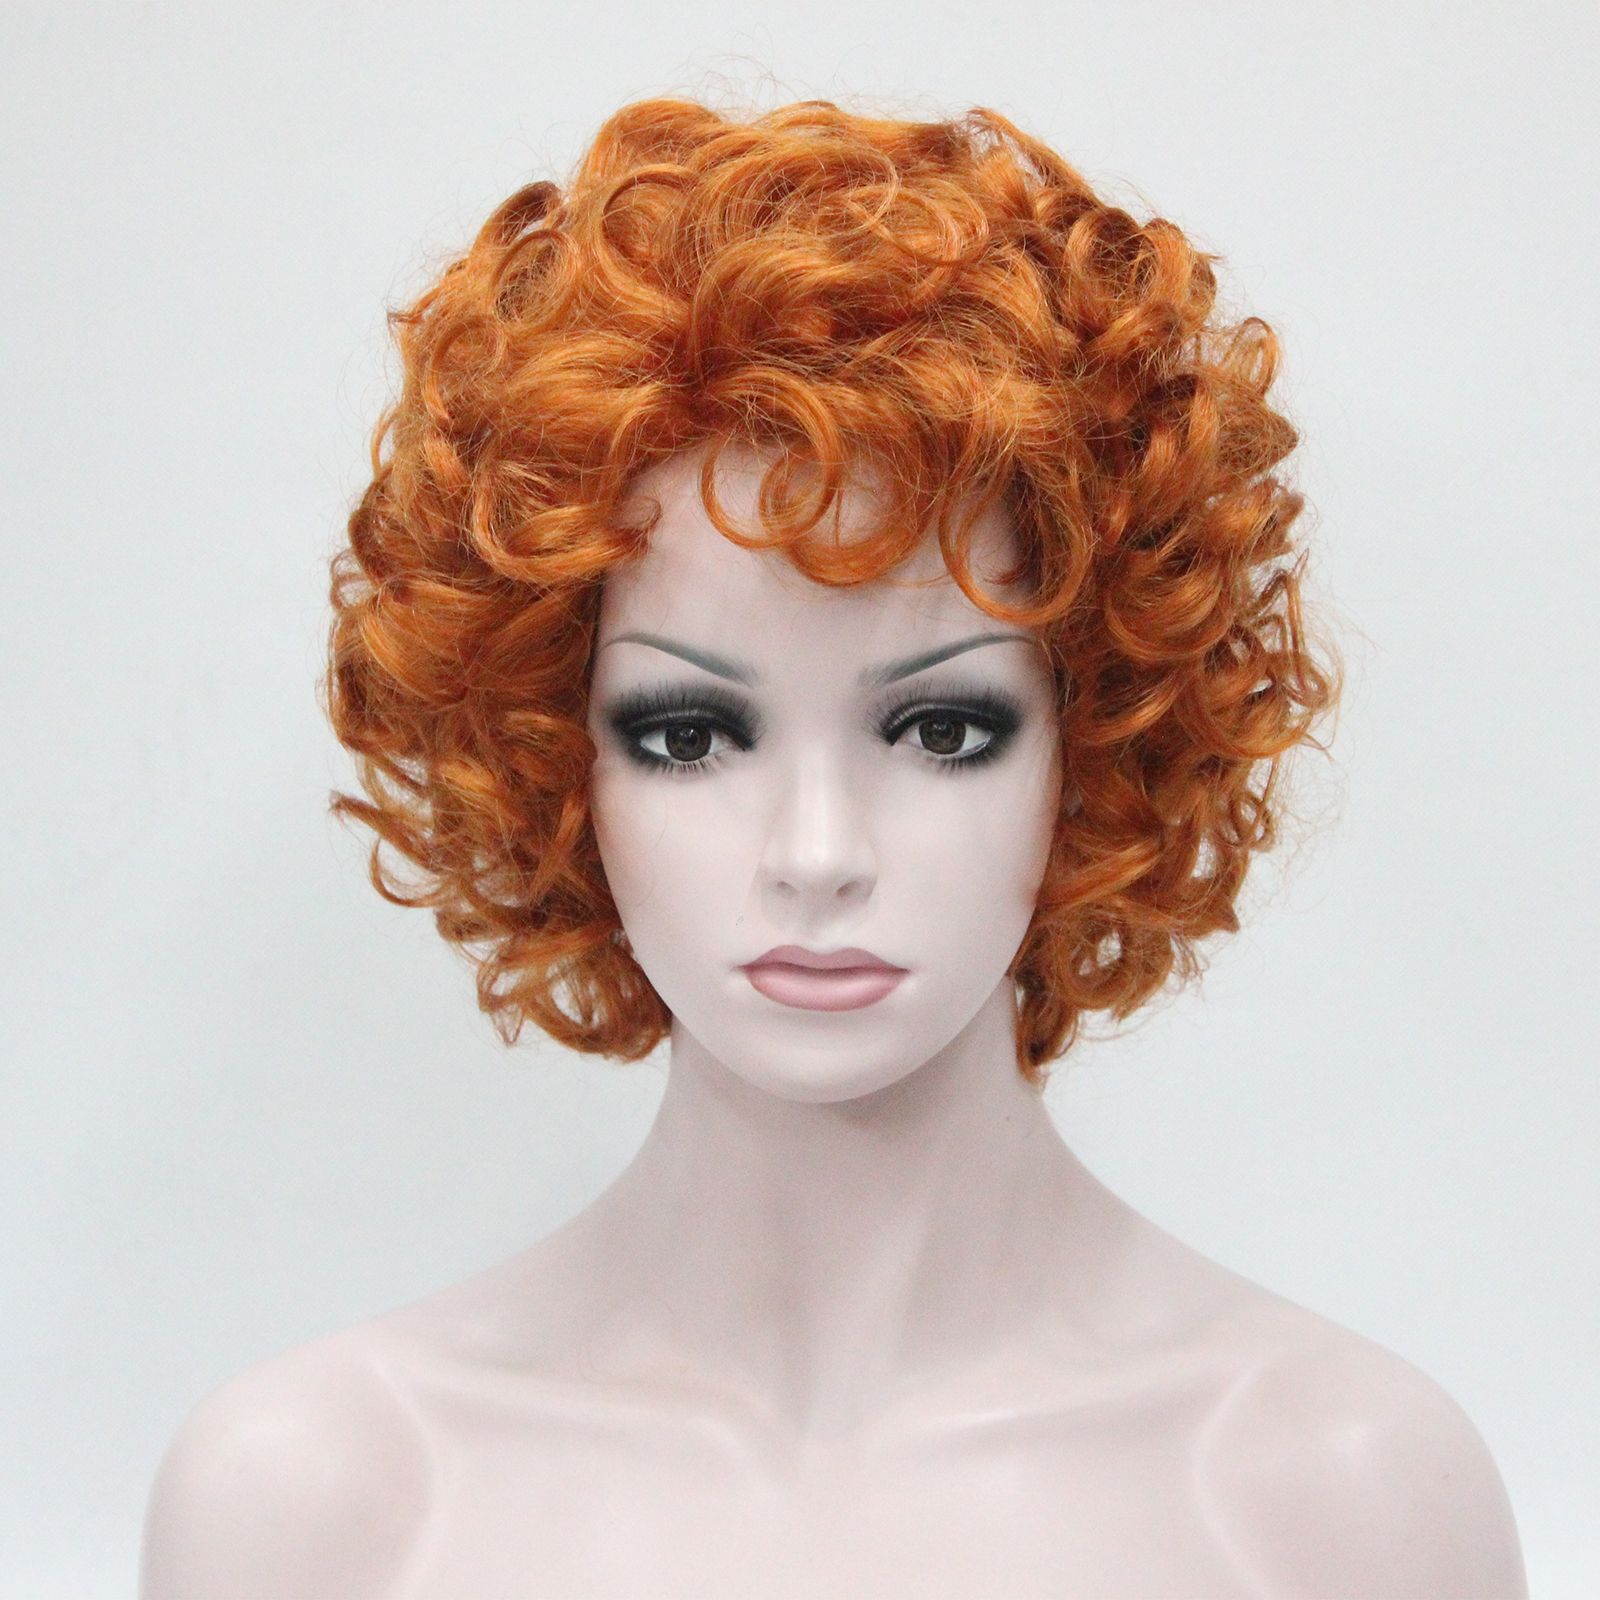 2018 New Charming Sexy Fashion Cute Cosplay Sexy Orange Highlights Curly Short Wig Women S Full